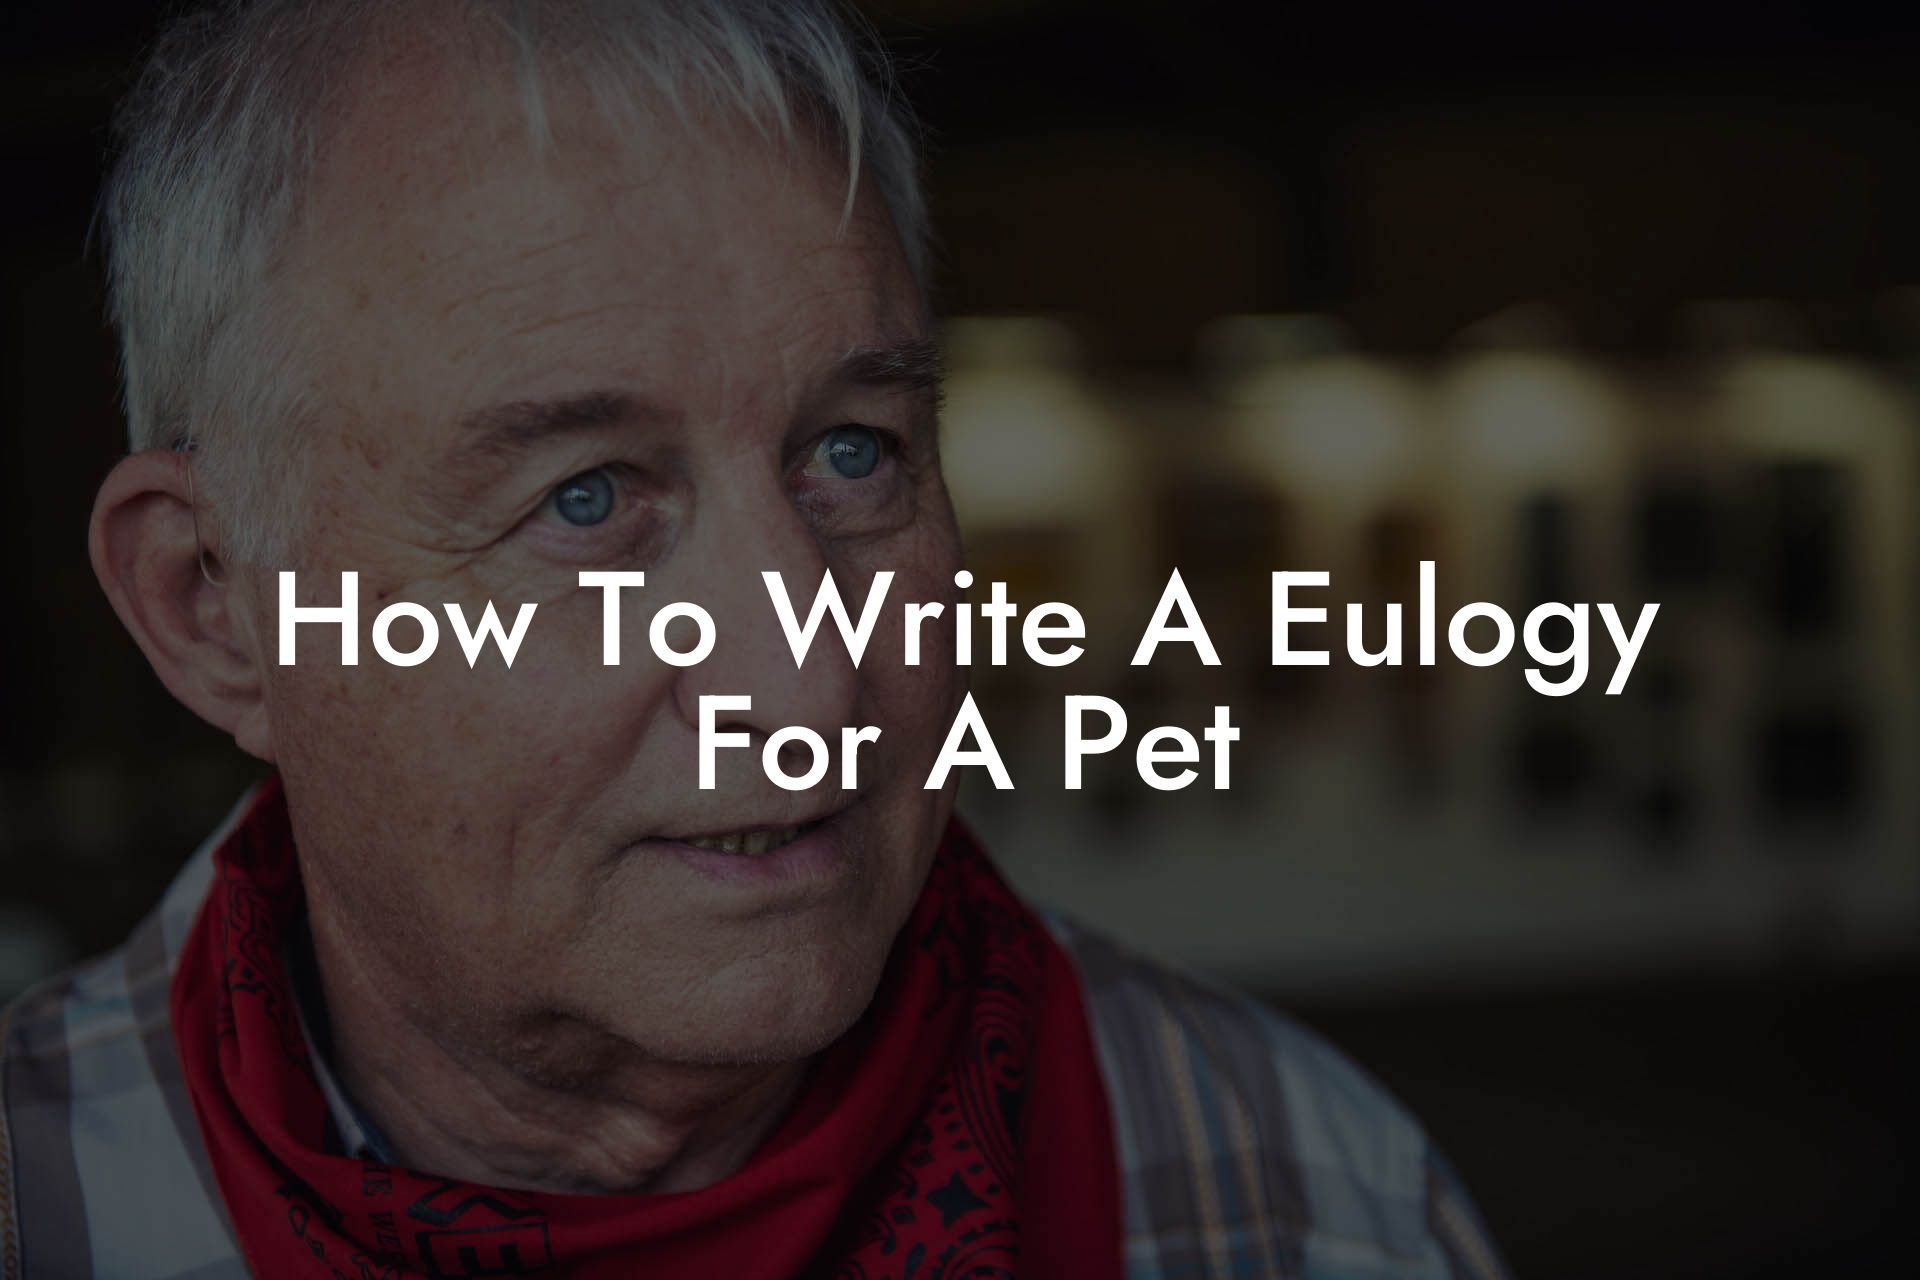 How To Write A Eulogy For A Pet